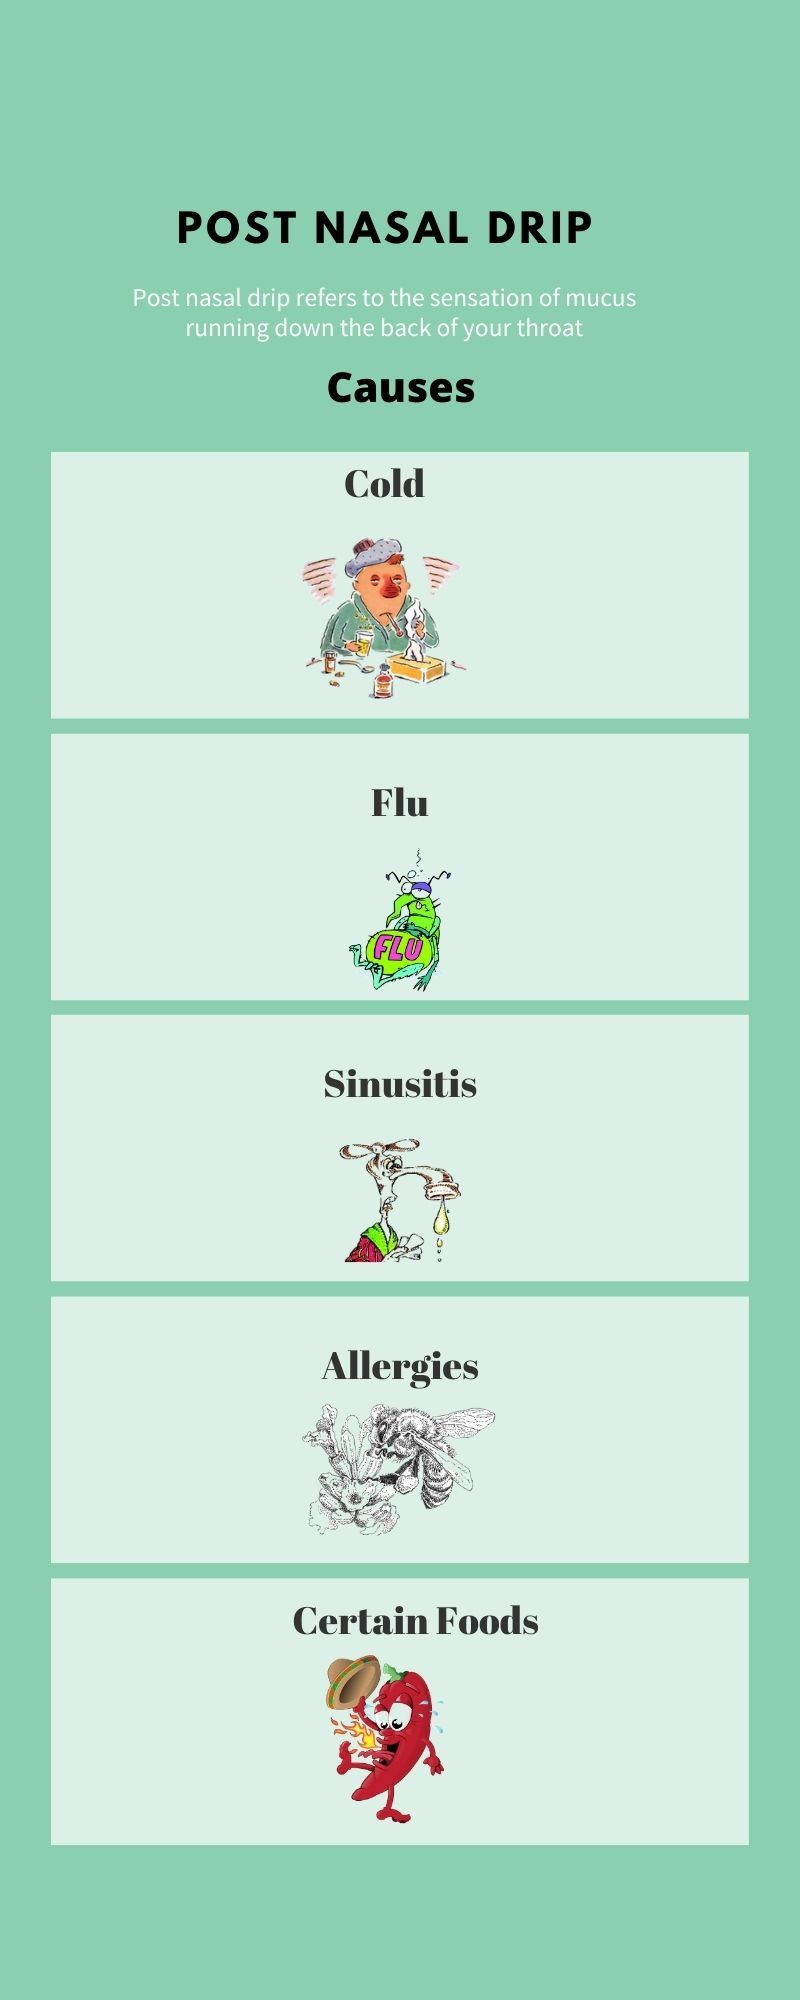 An infographic with cartoon images illustrating causes of post nasal drip with explanatory text described below. 